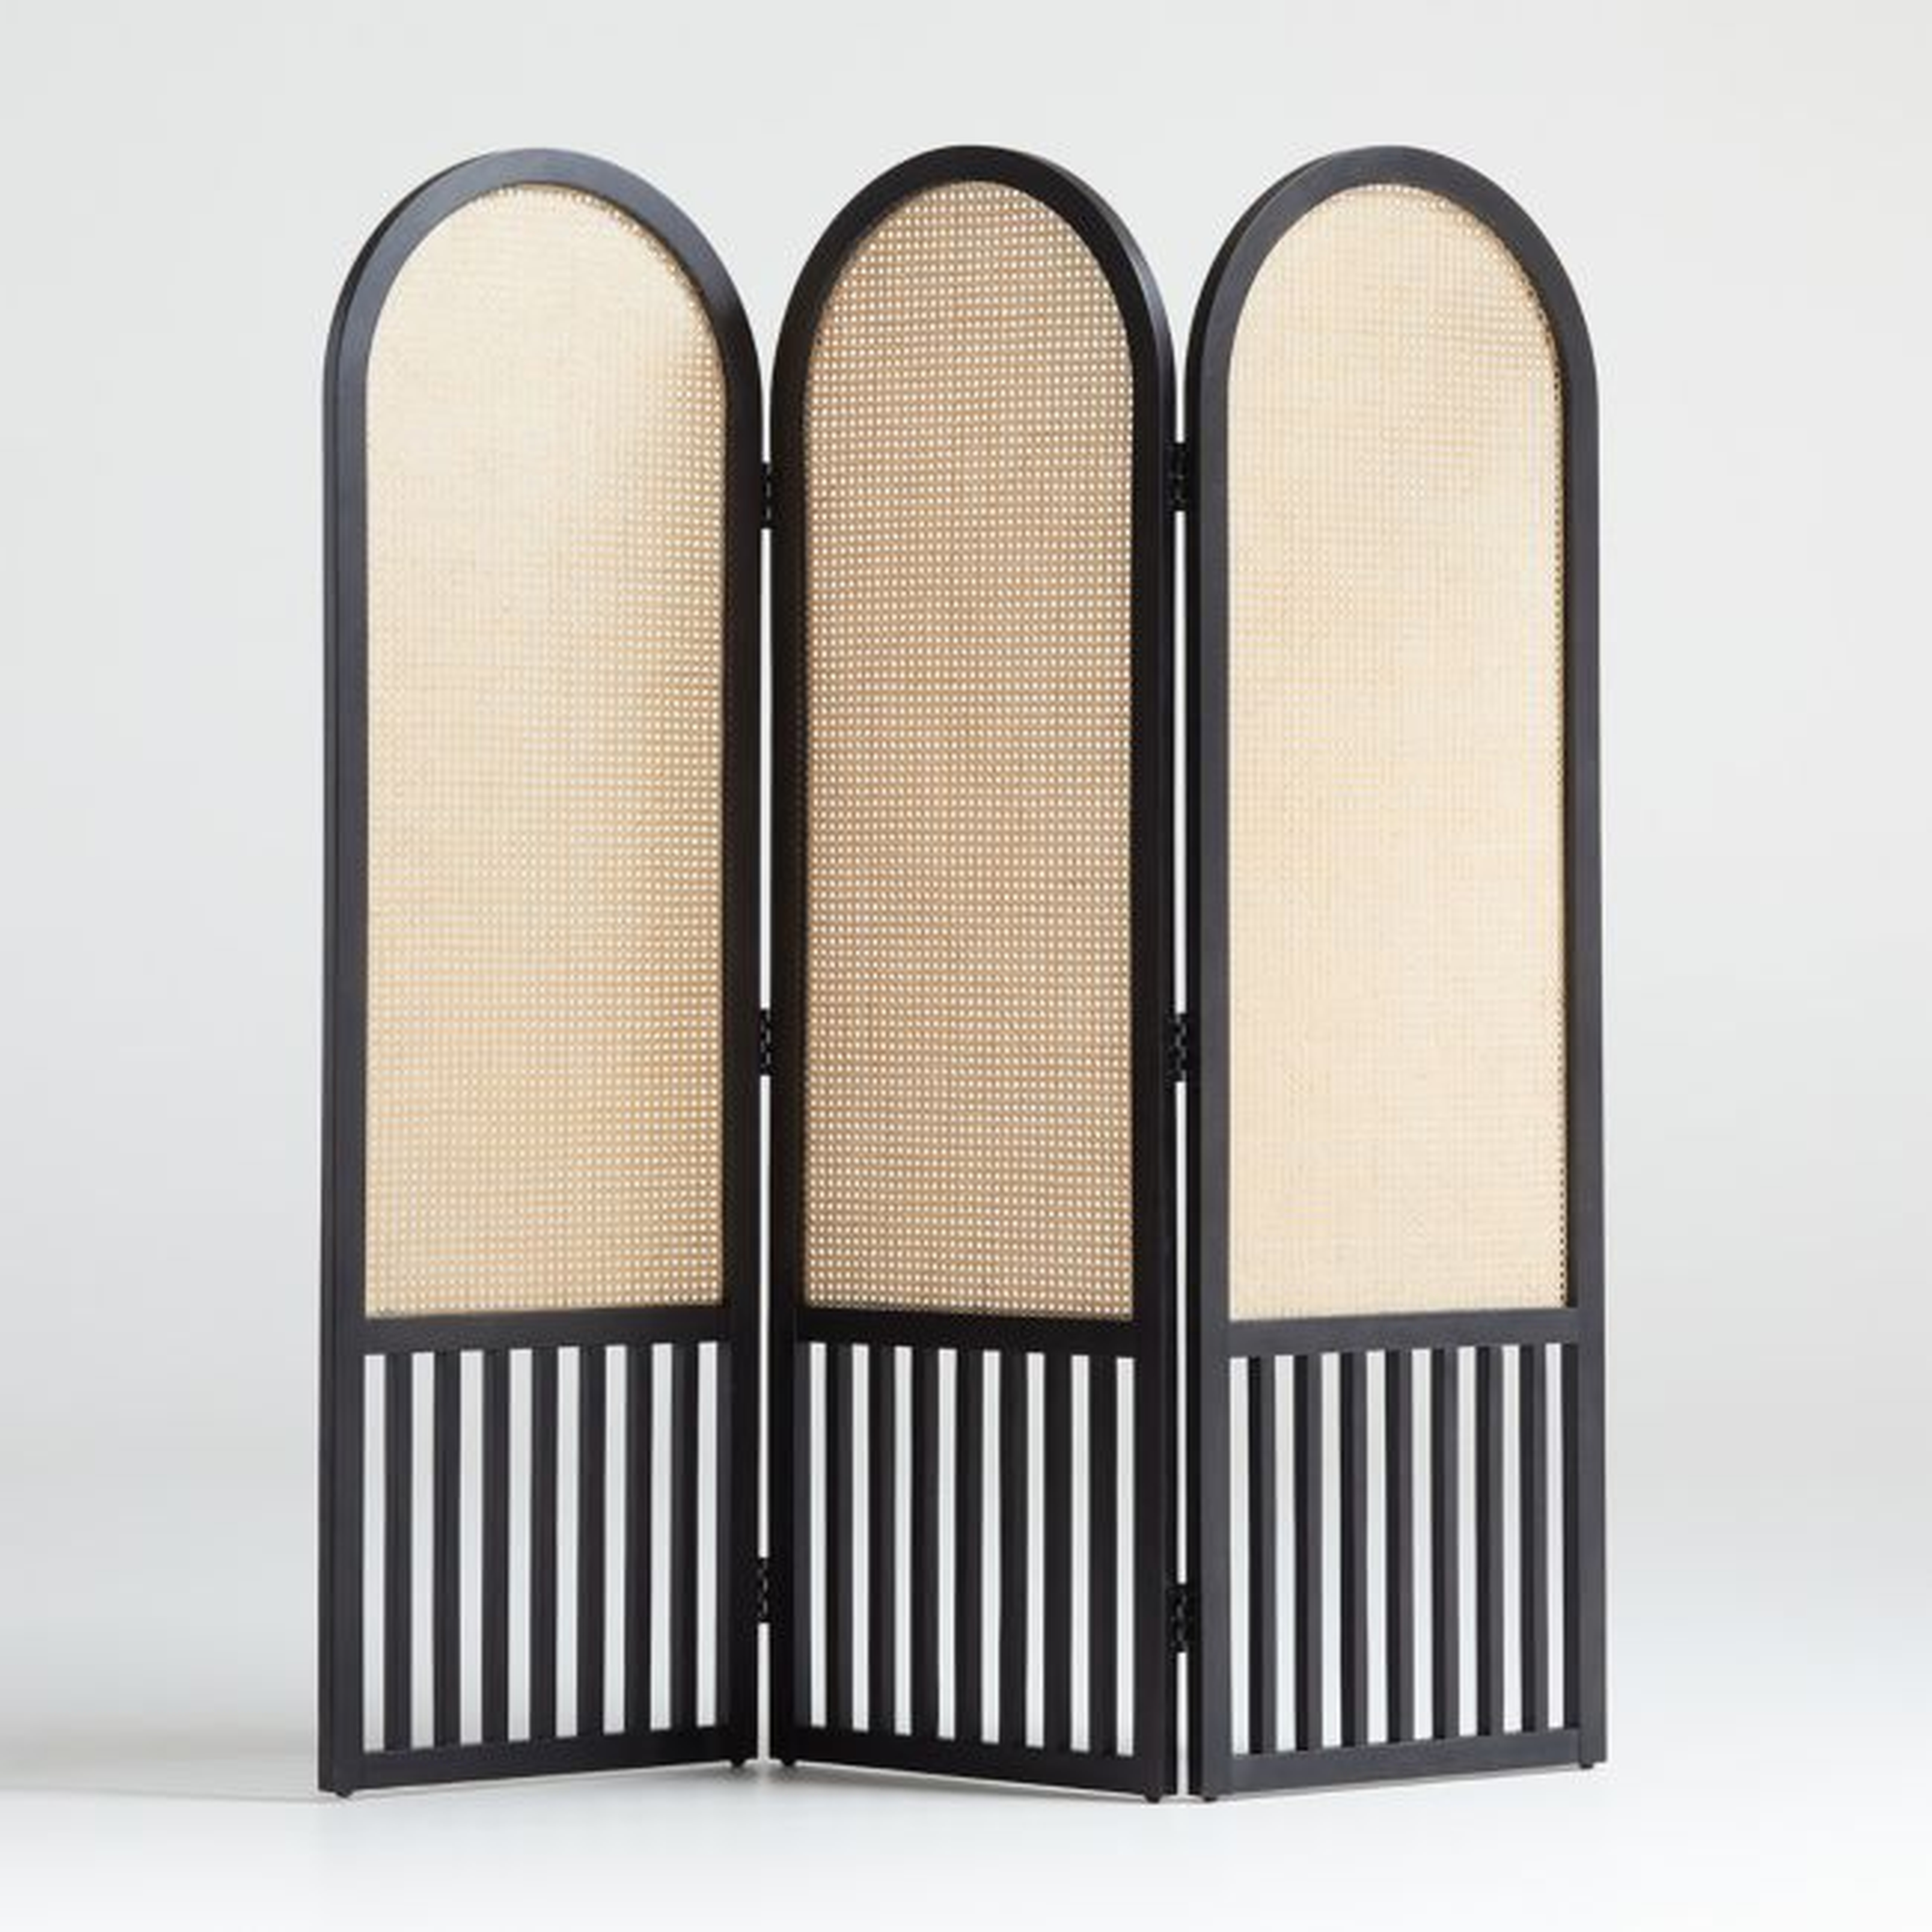 Anaise Cane Room Divider Screen - Crate and Barrel